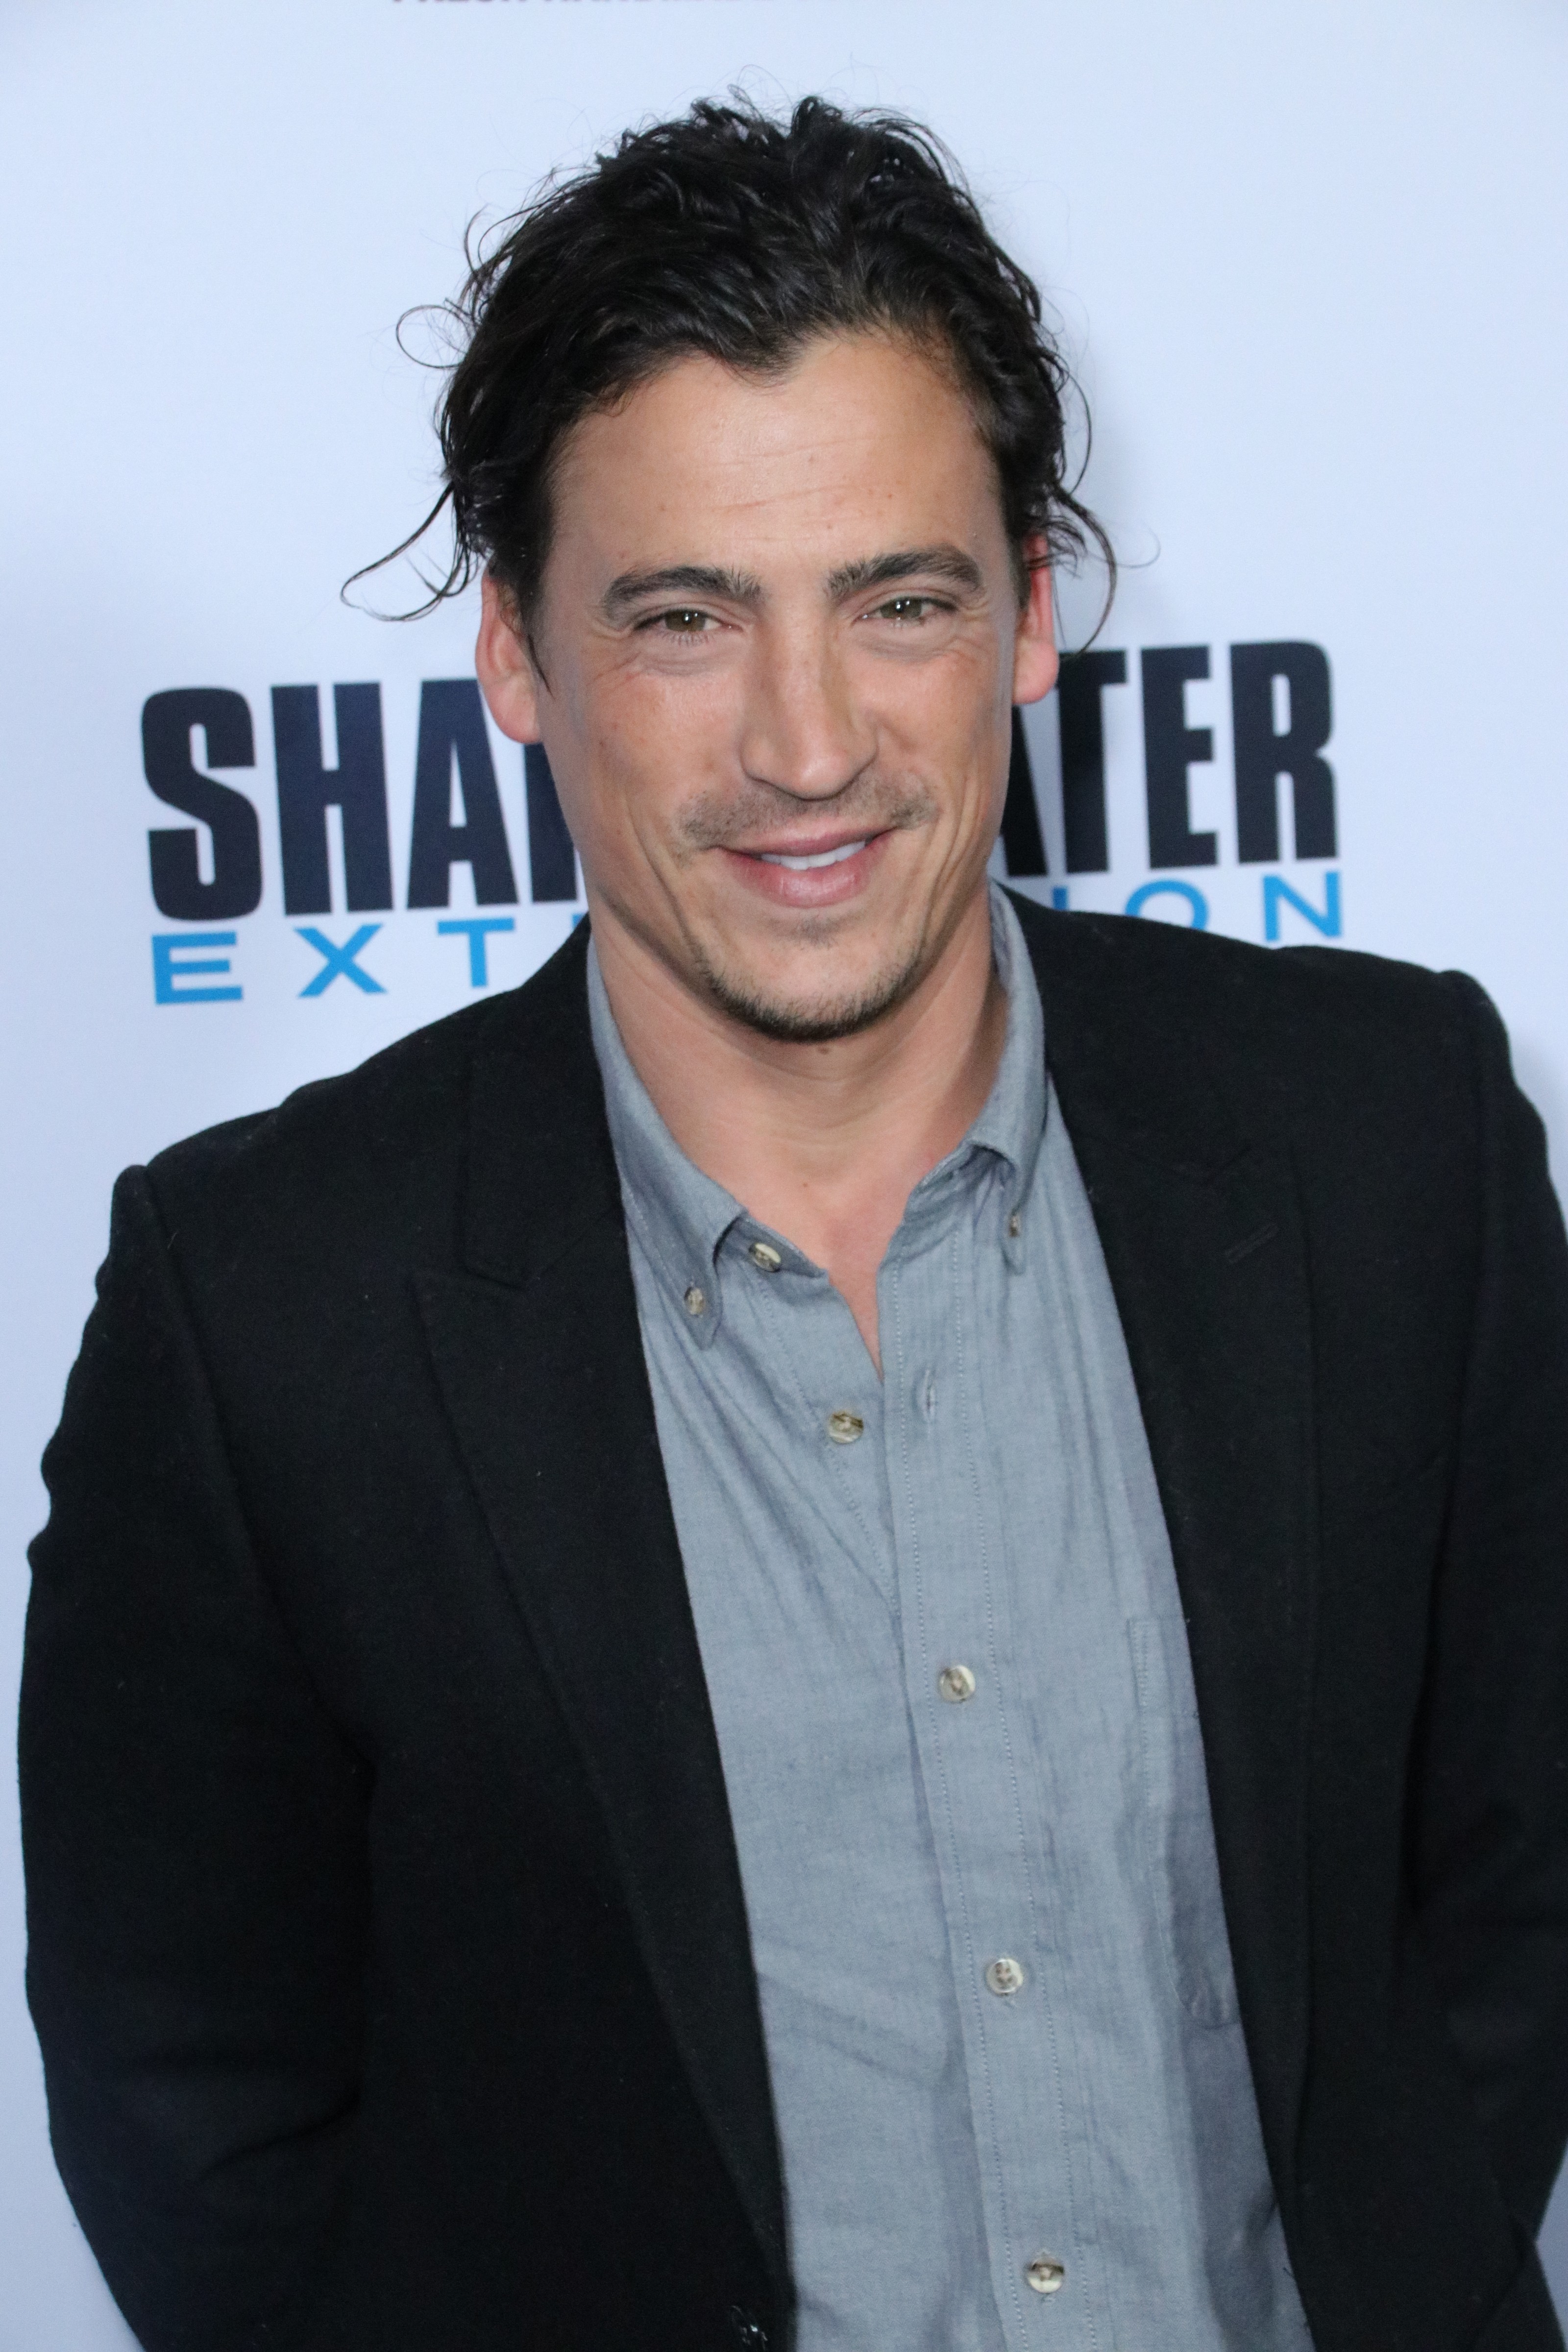 Los Angeles premiere of 'Sharkwater Extinction' - Arrivals